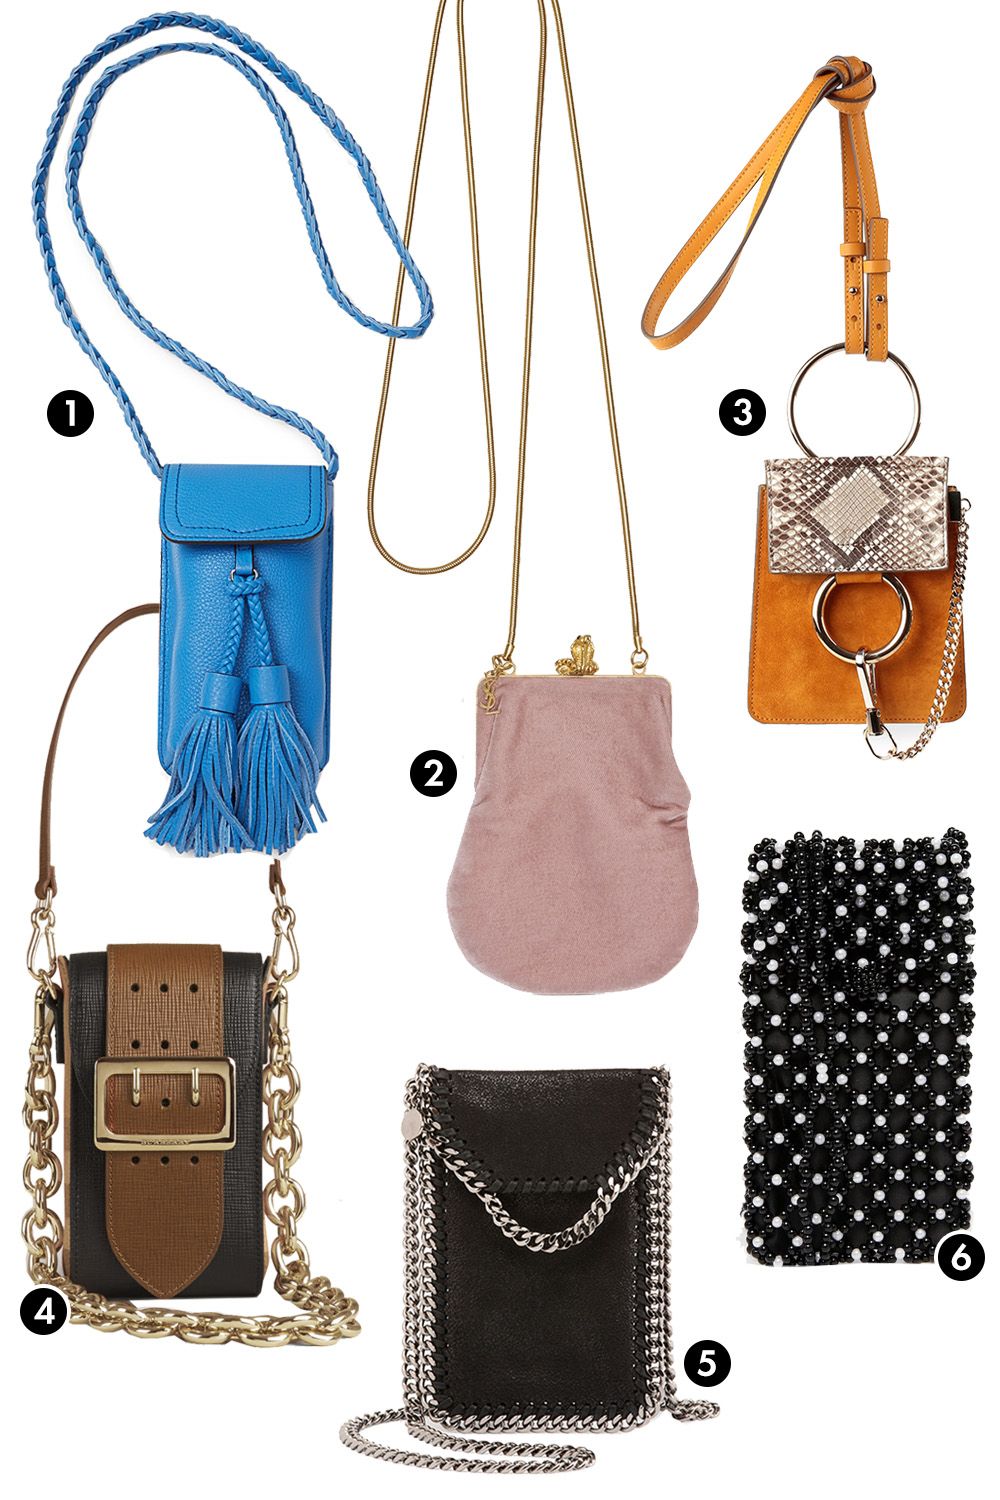 Where To Buy Spring Purses For Less - Mash Elle